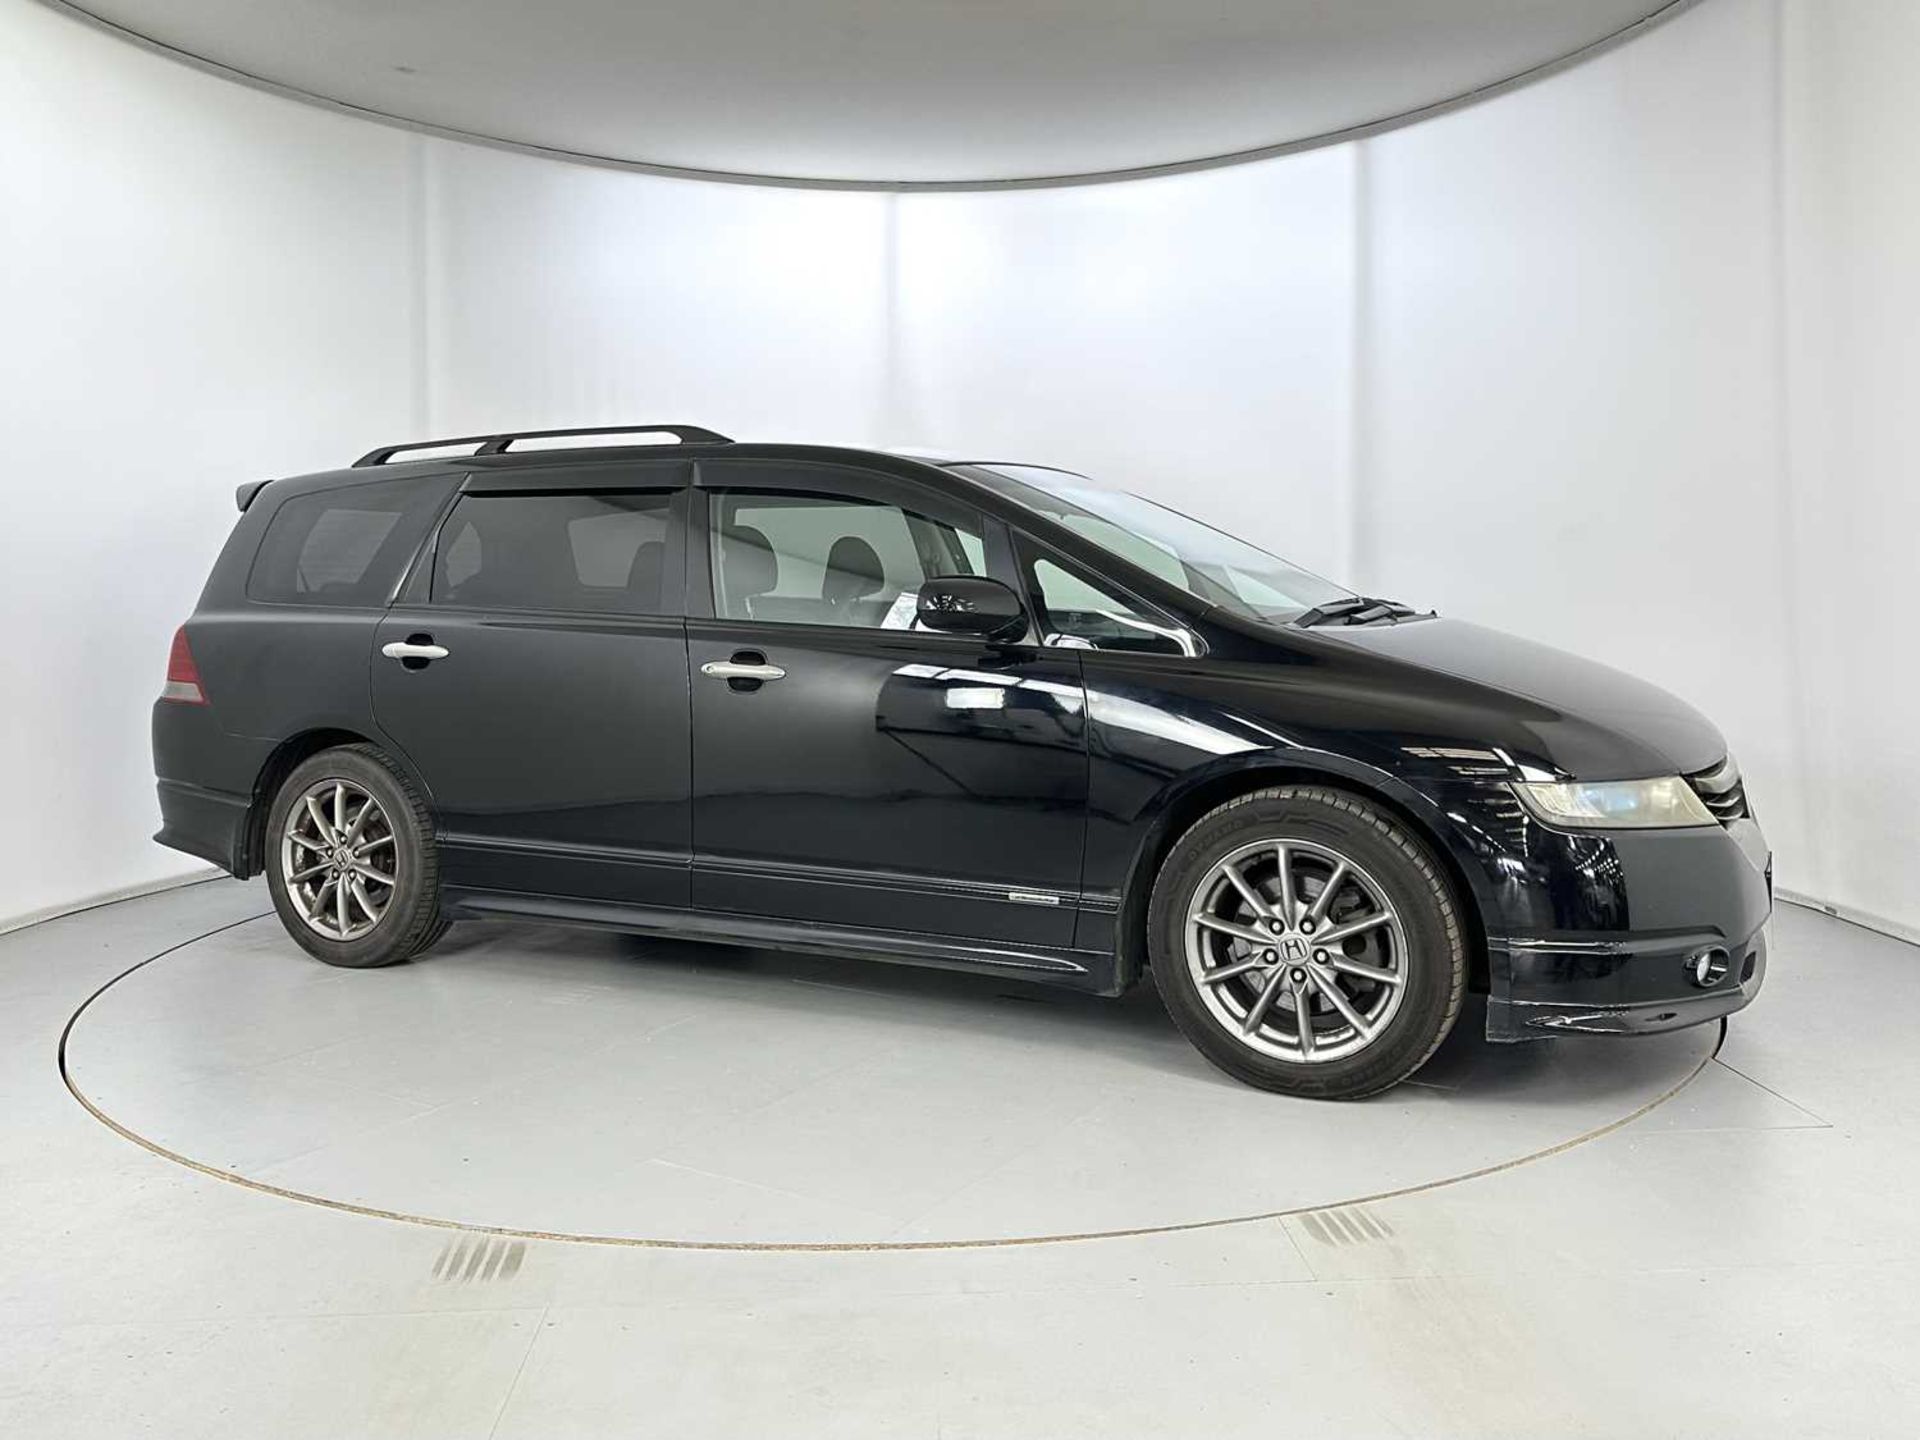 2005 Honda Odyssey RB1 Absolute - Image 12 of 36